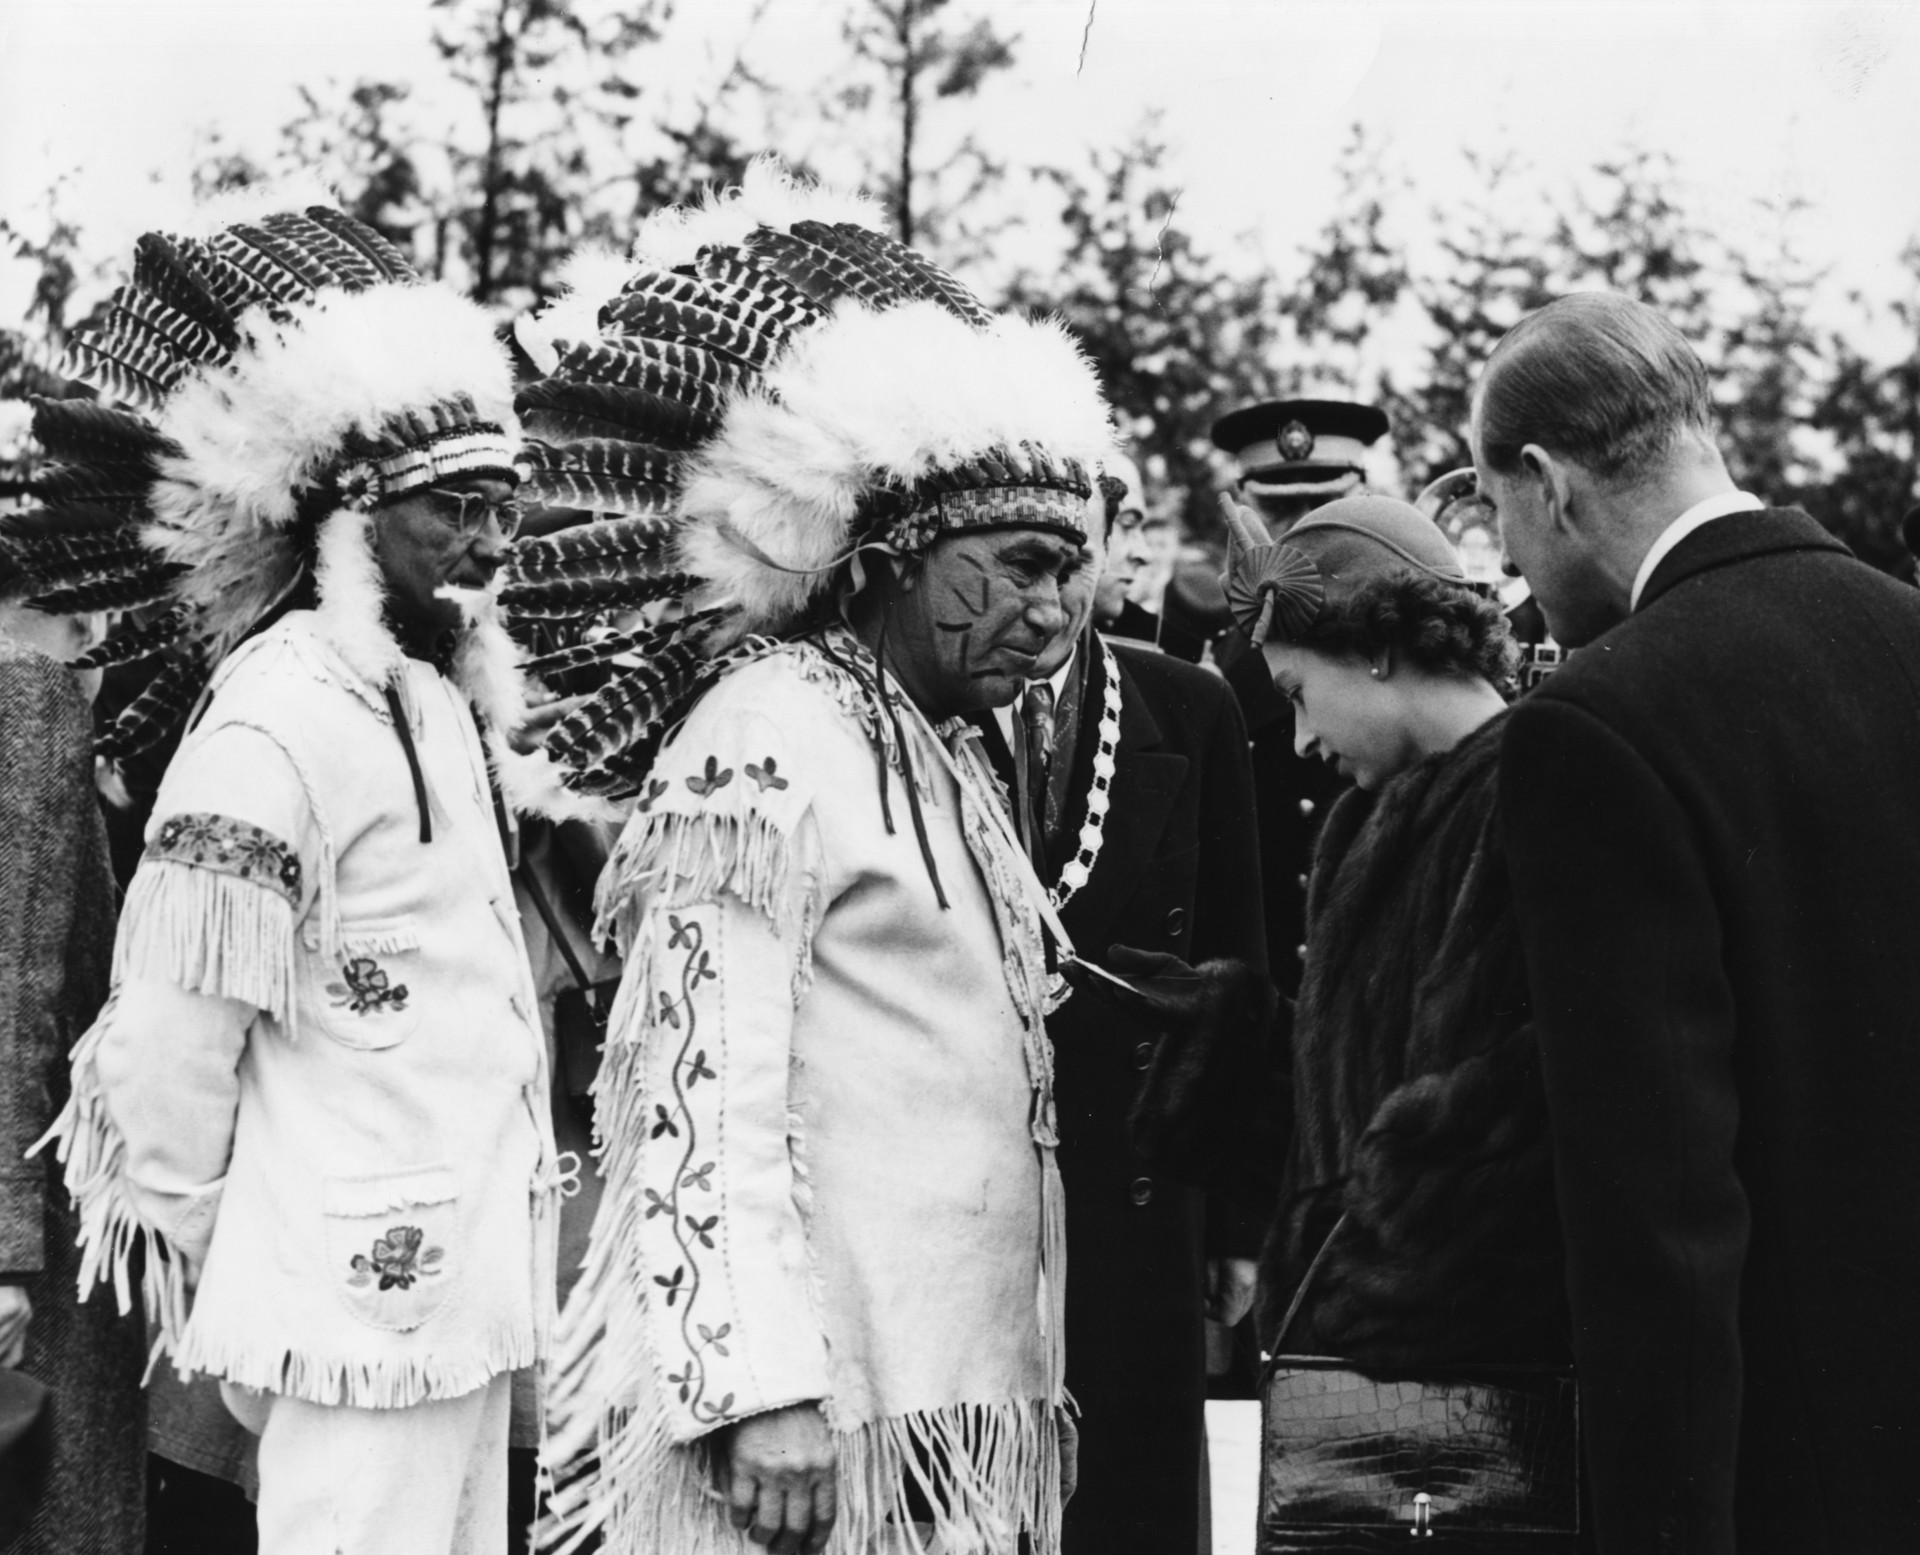 Princess Elizabeth and Prince Philip greet members of the Ojiway First Nation during their tour of Fort William.<p><a href="https://www.msn.com/en-za/community/channel/vid-7xx8mnucu55yw63we9va2gwr7uihbxwc68fxqp25x6tg4ftibpra?cvid=94631541bc0f4f89bfd59158d696ad7e">Follow us and access great exclusive content every day</a></p>